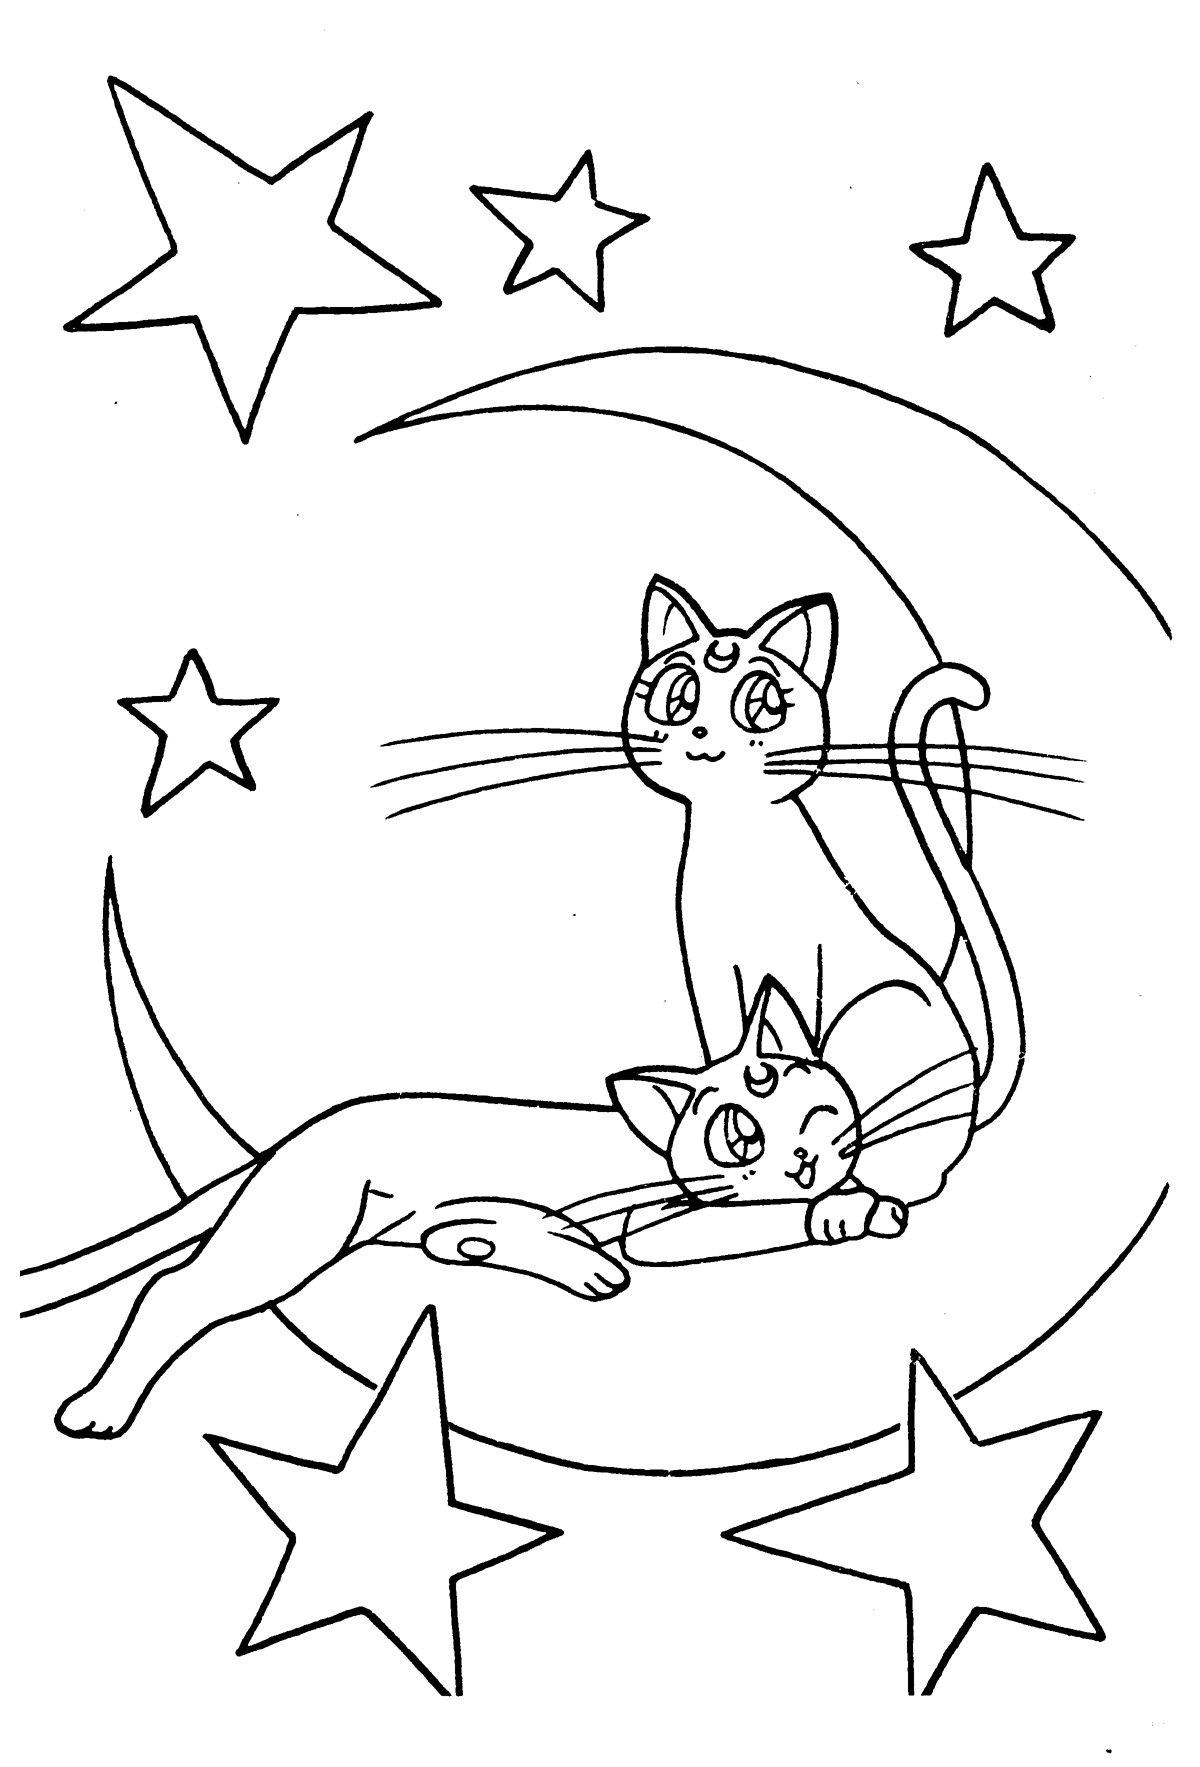 Sailor moon coloring pages, Sailor moon wallpaper, Coloring books